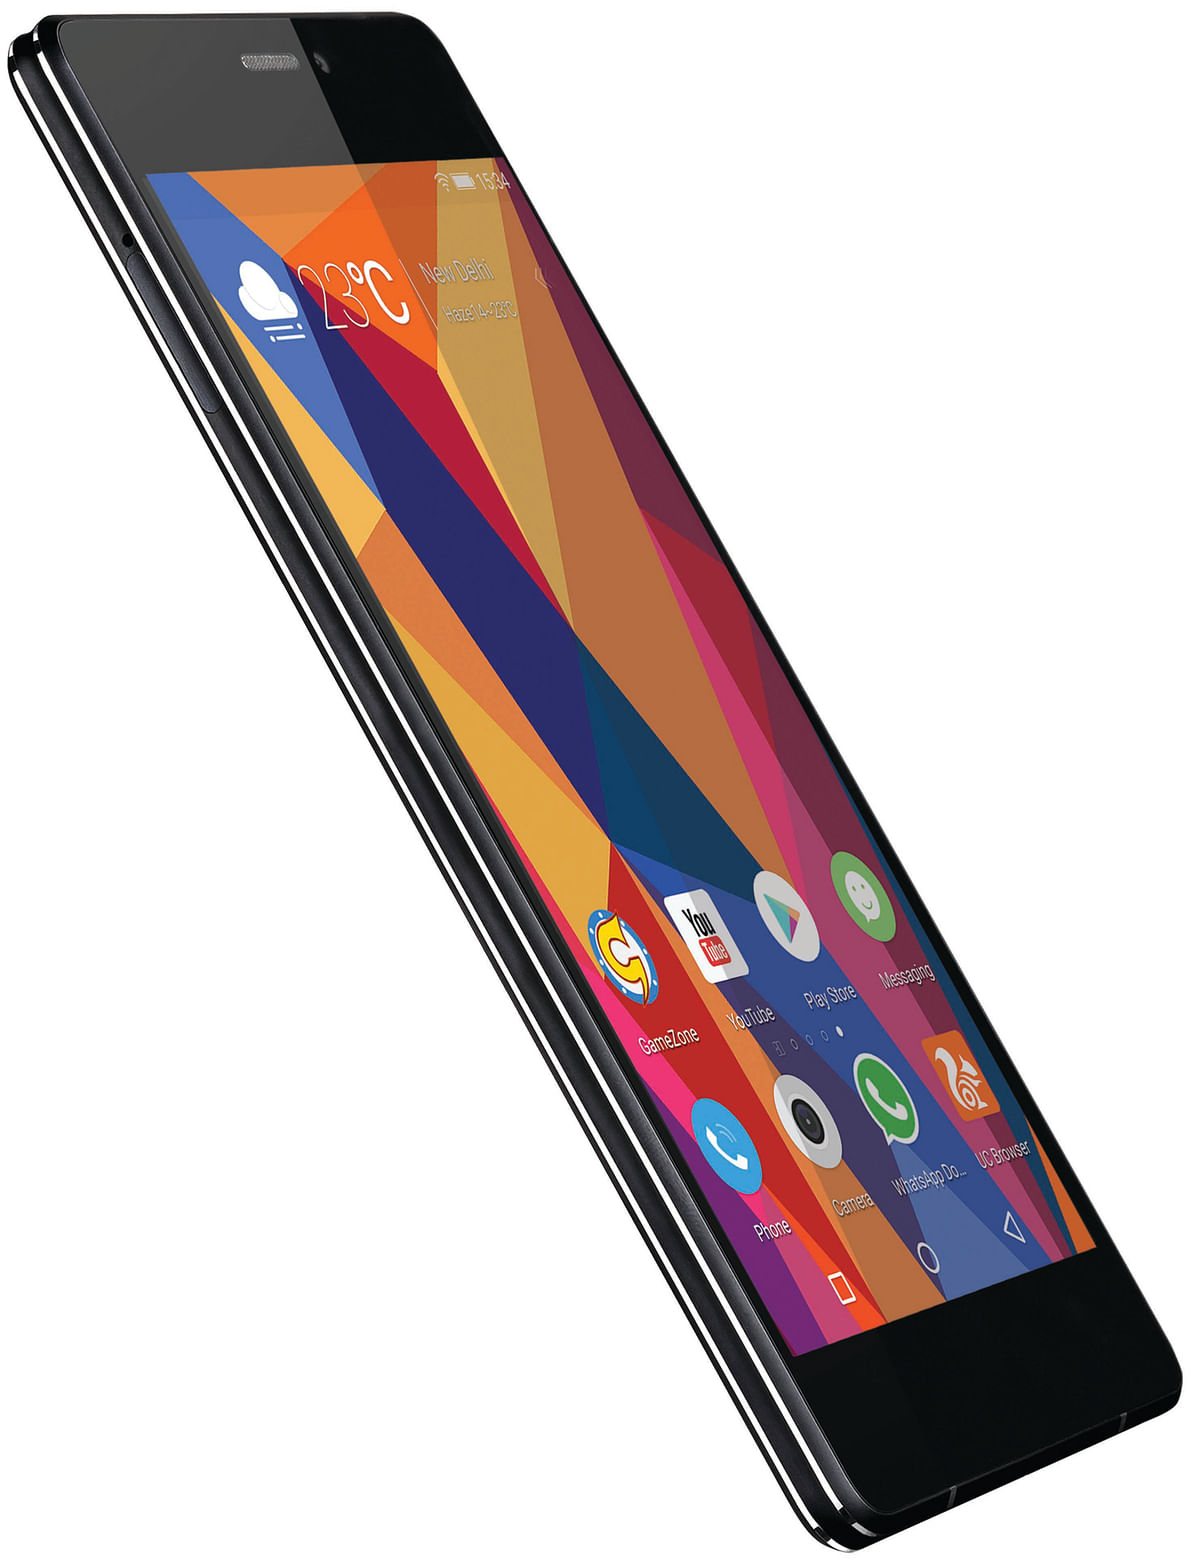 Why you should buy the flagship smartphone Gionee ELIFE S7 for Rs 24,999